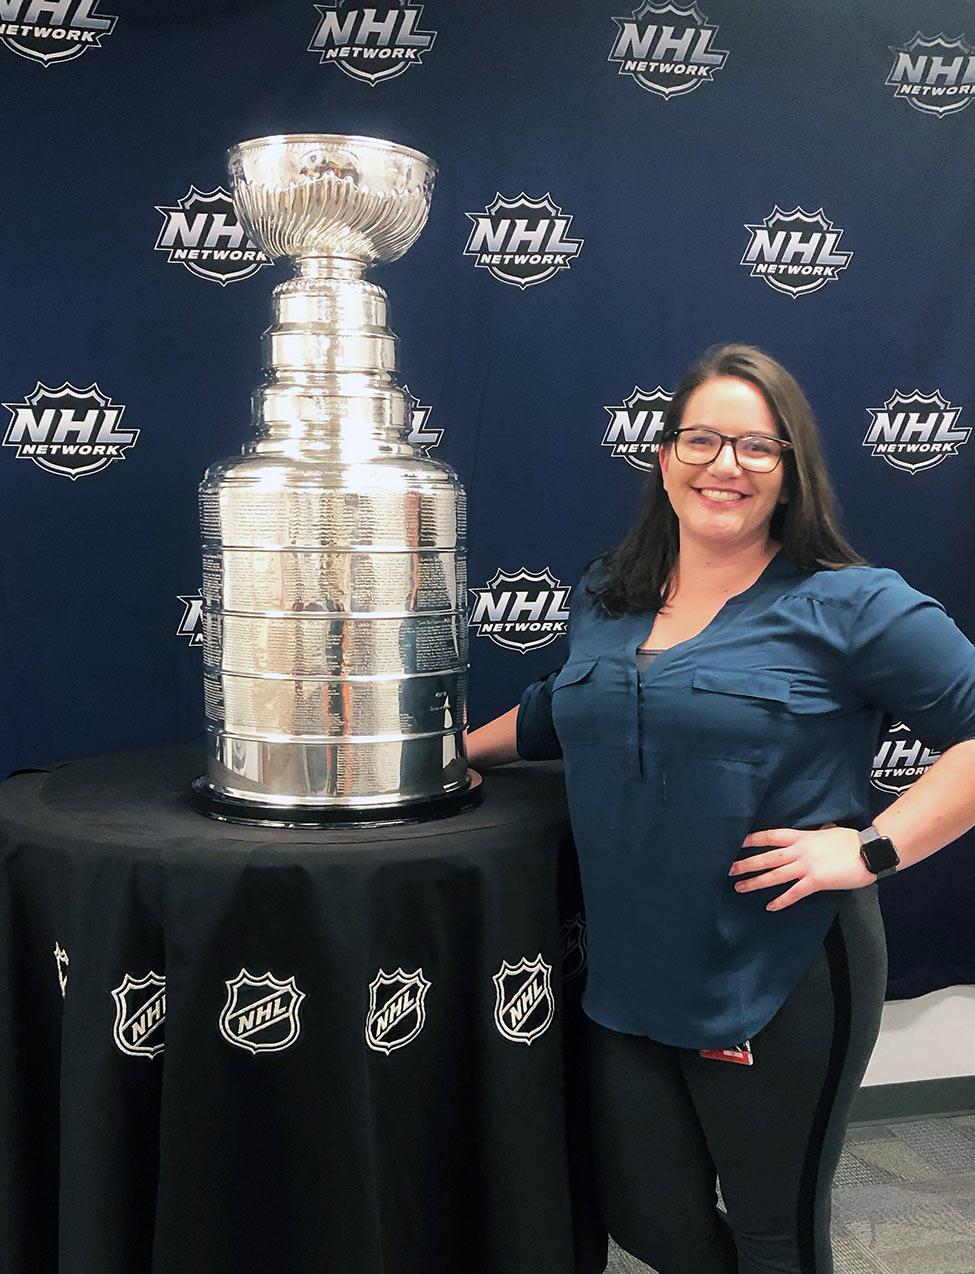 Pace University's Media, Communications, and Visual Arts alum Kelly Writenour posing with the NHL Stanley Cup